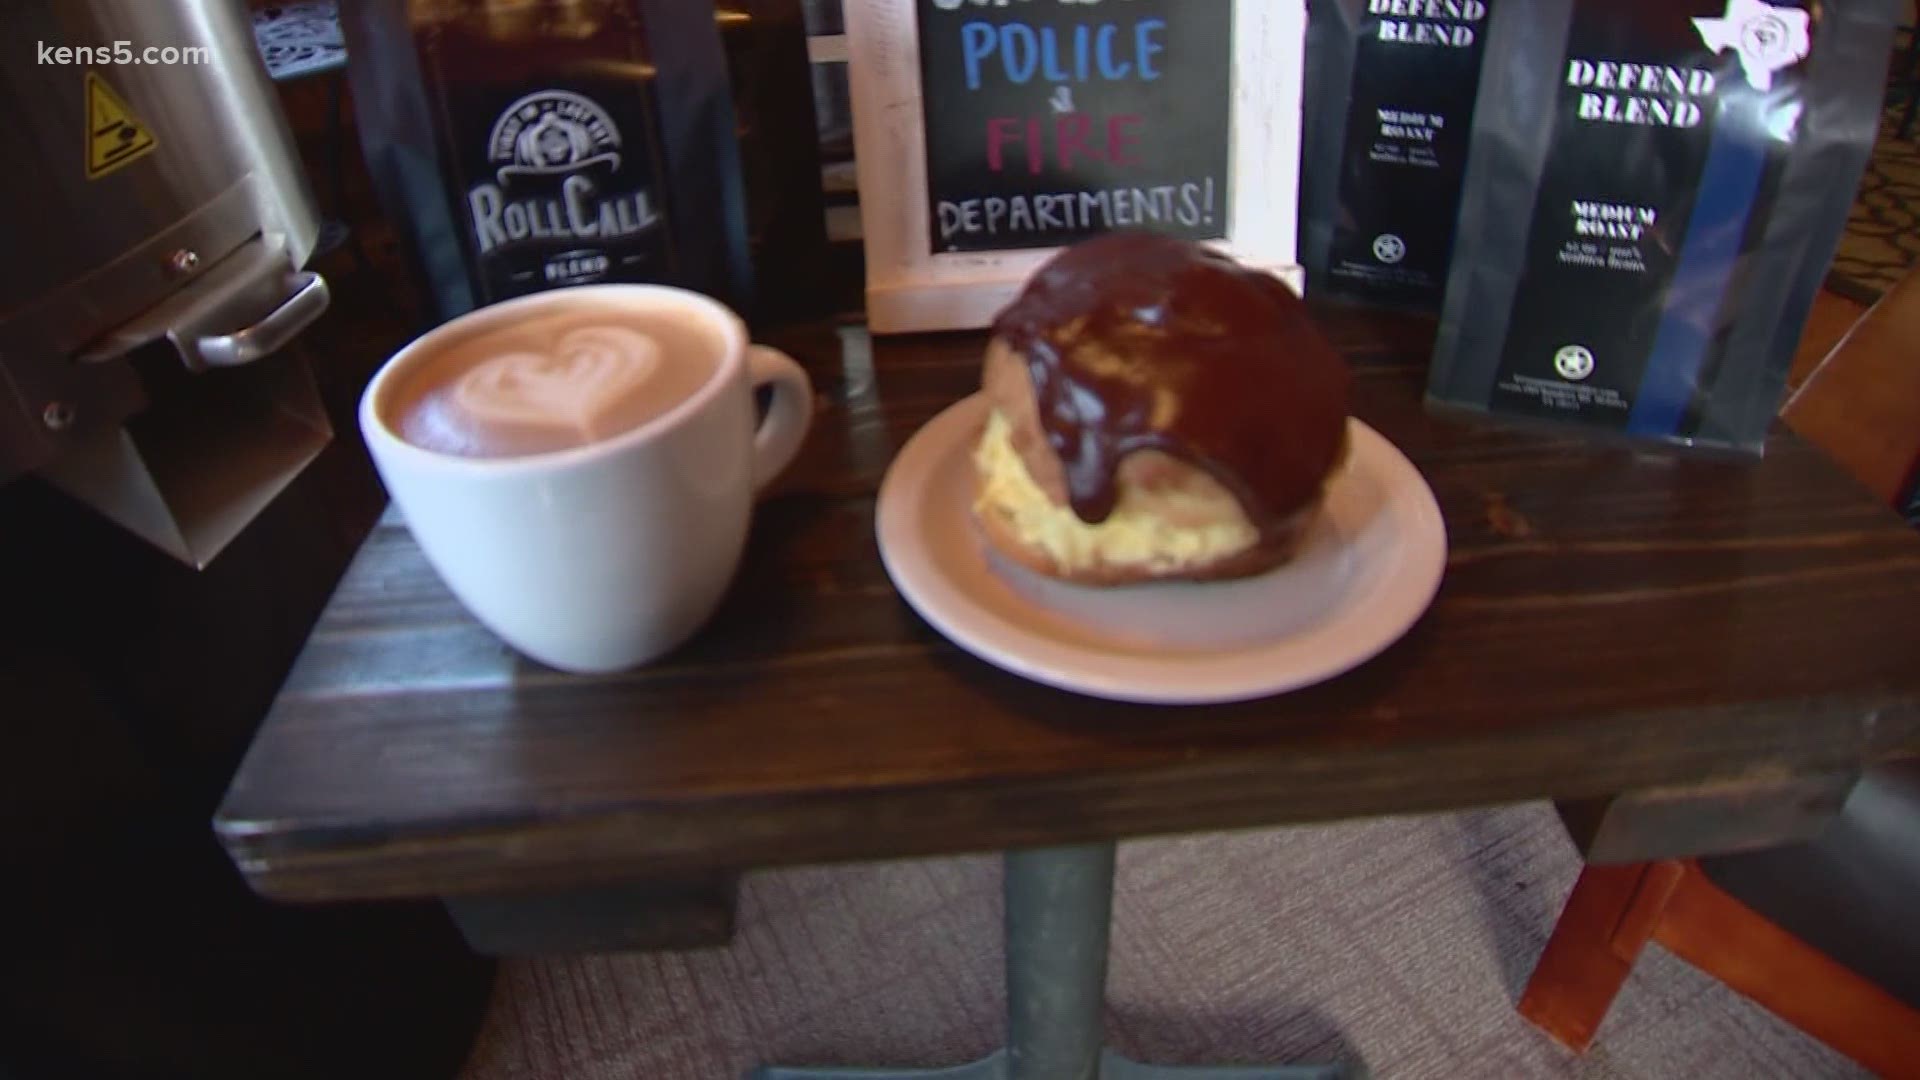 Jennifer Howard, a former teacher, makes cream puffs the size of burgers. Phillip Santillanes, an Air Force veteran, knew how to brew the perfect cup of coffee.